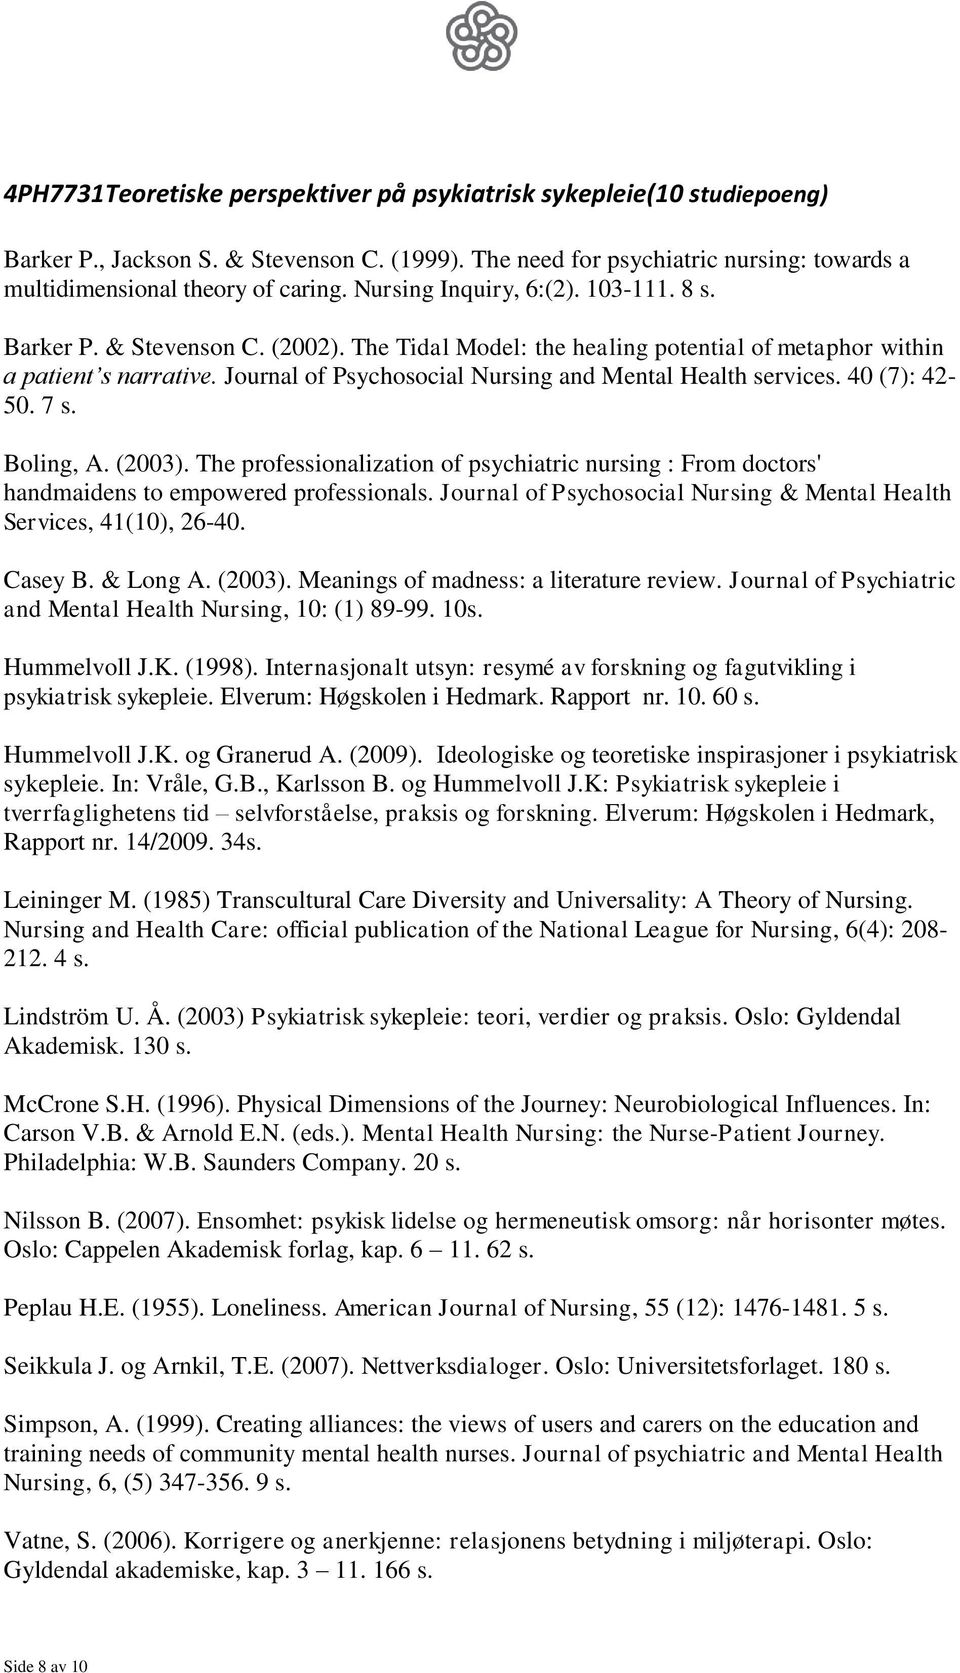 Journal of Psychosocial Nursing and Mental Health services. 40 (7): 42-50. 7 s. Boling, A. (2003).